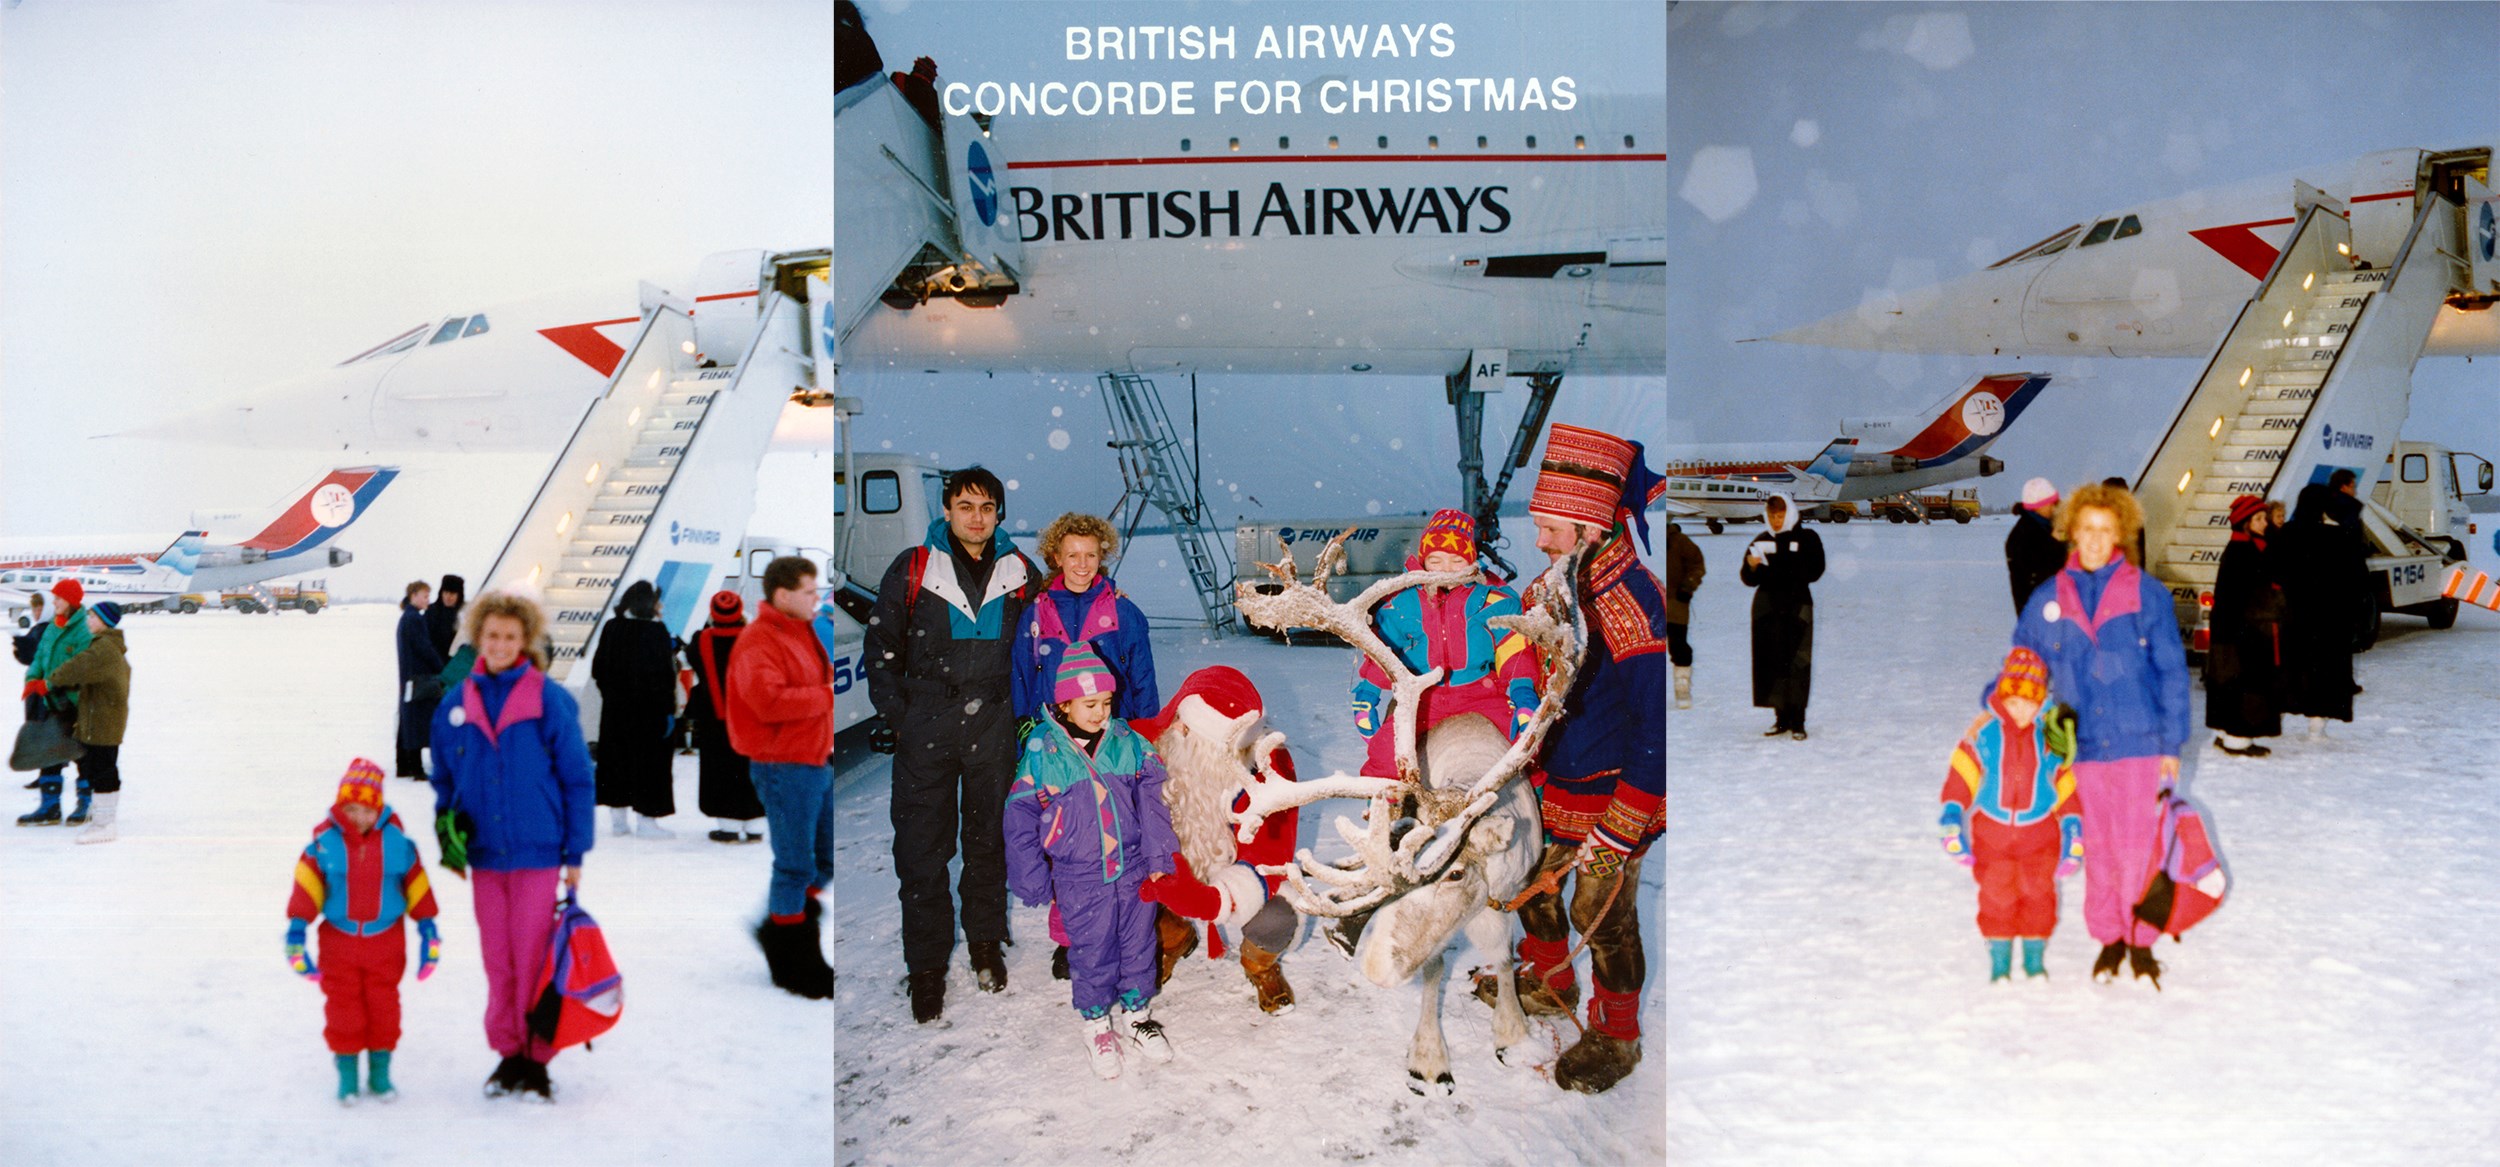 Photos from the early 90s showing people in the snow in front of Concorde.